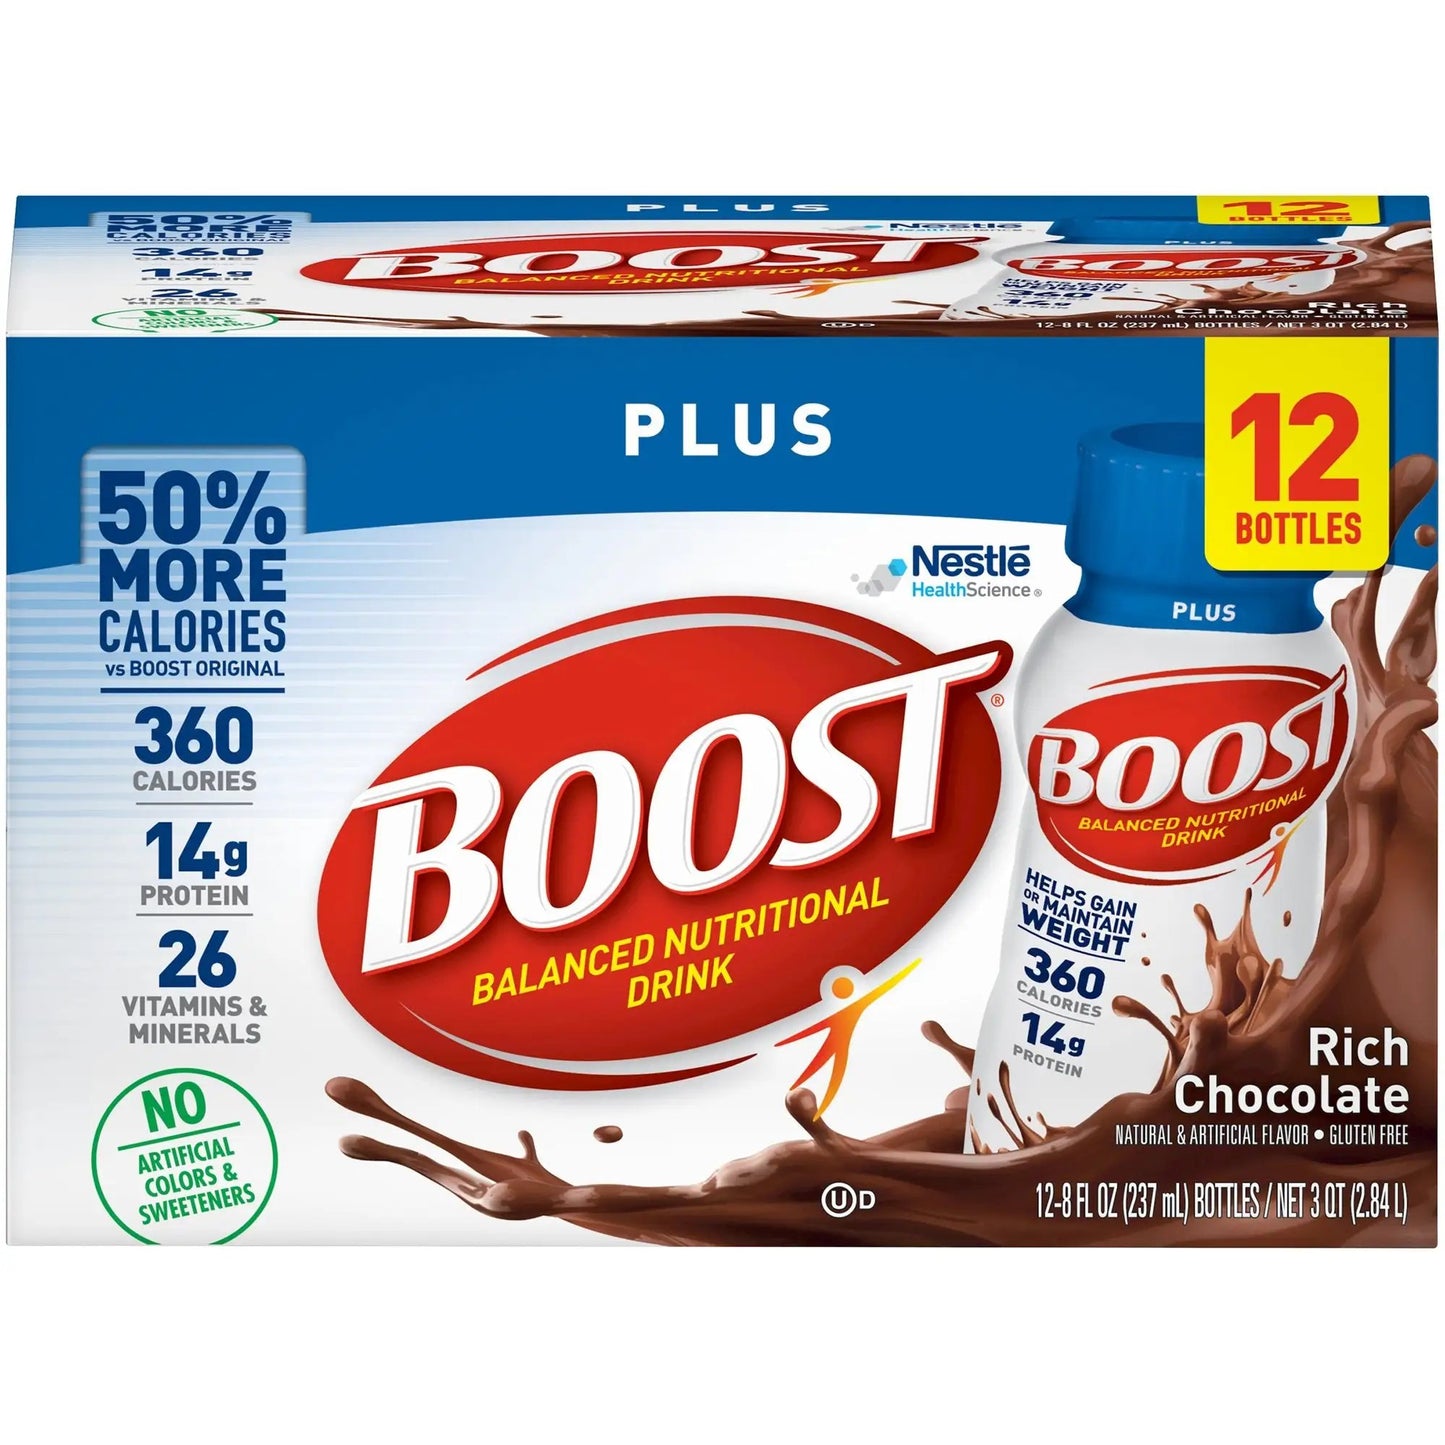 Boost Plus Chocolate Oral Supplement, 8 oz. Bottle, 12 per Pack